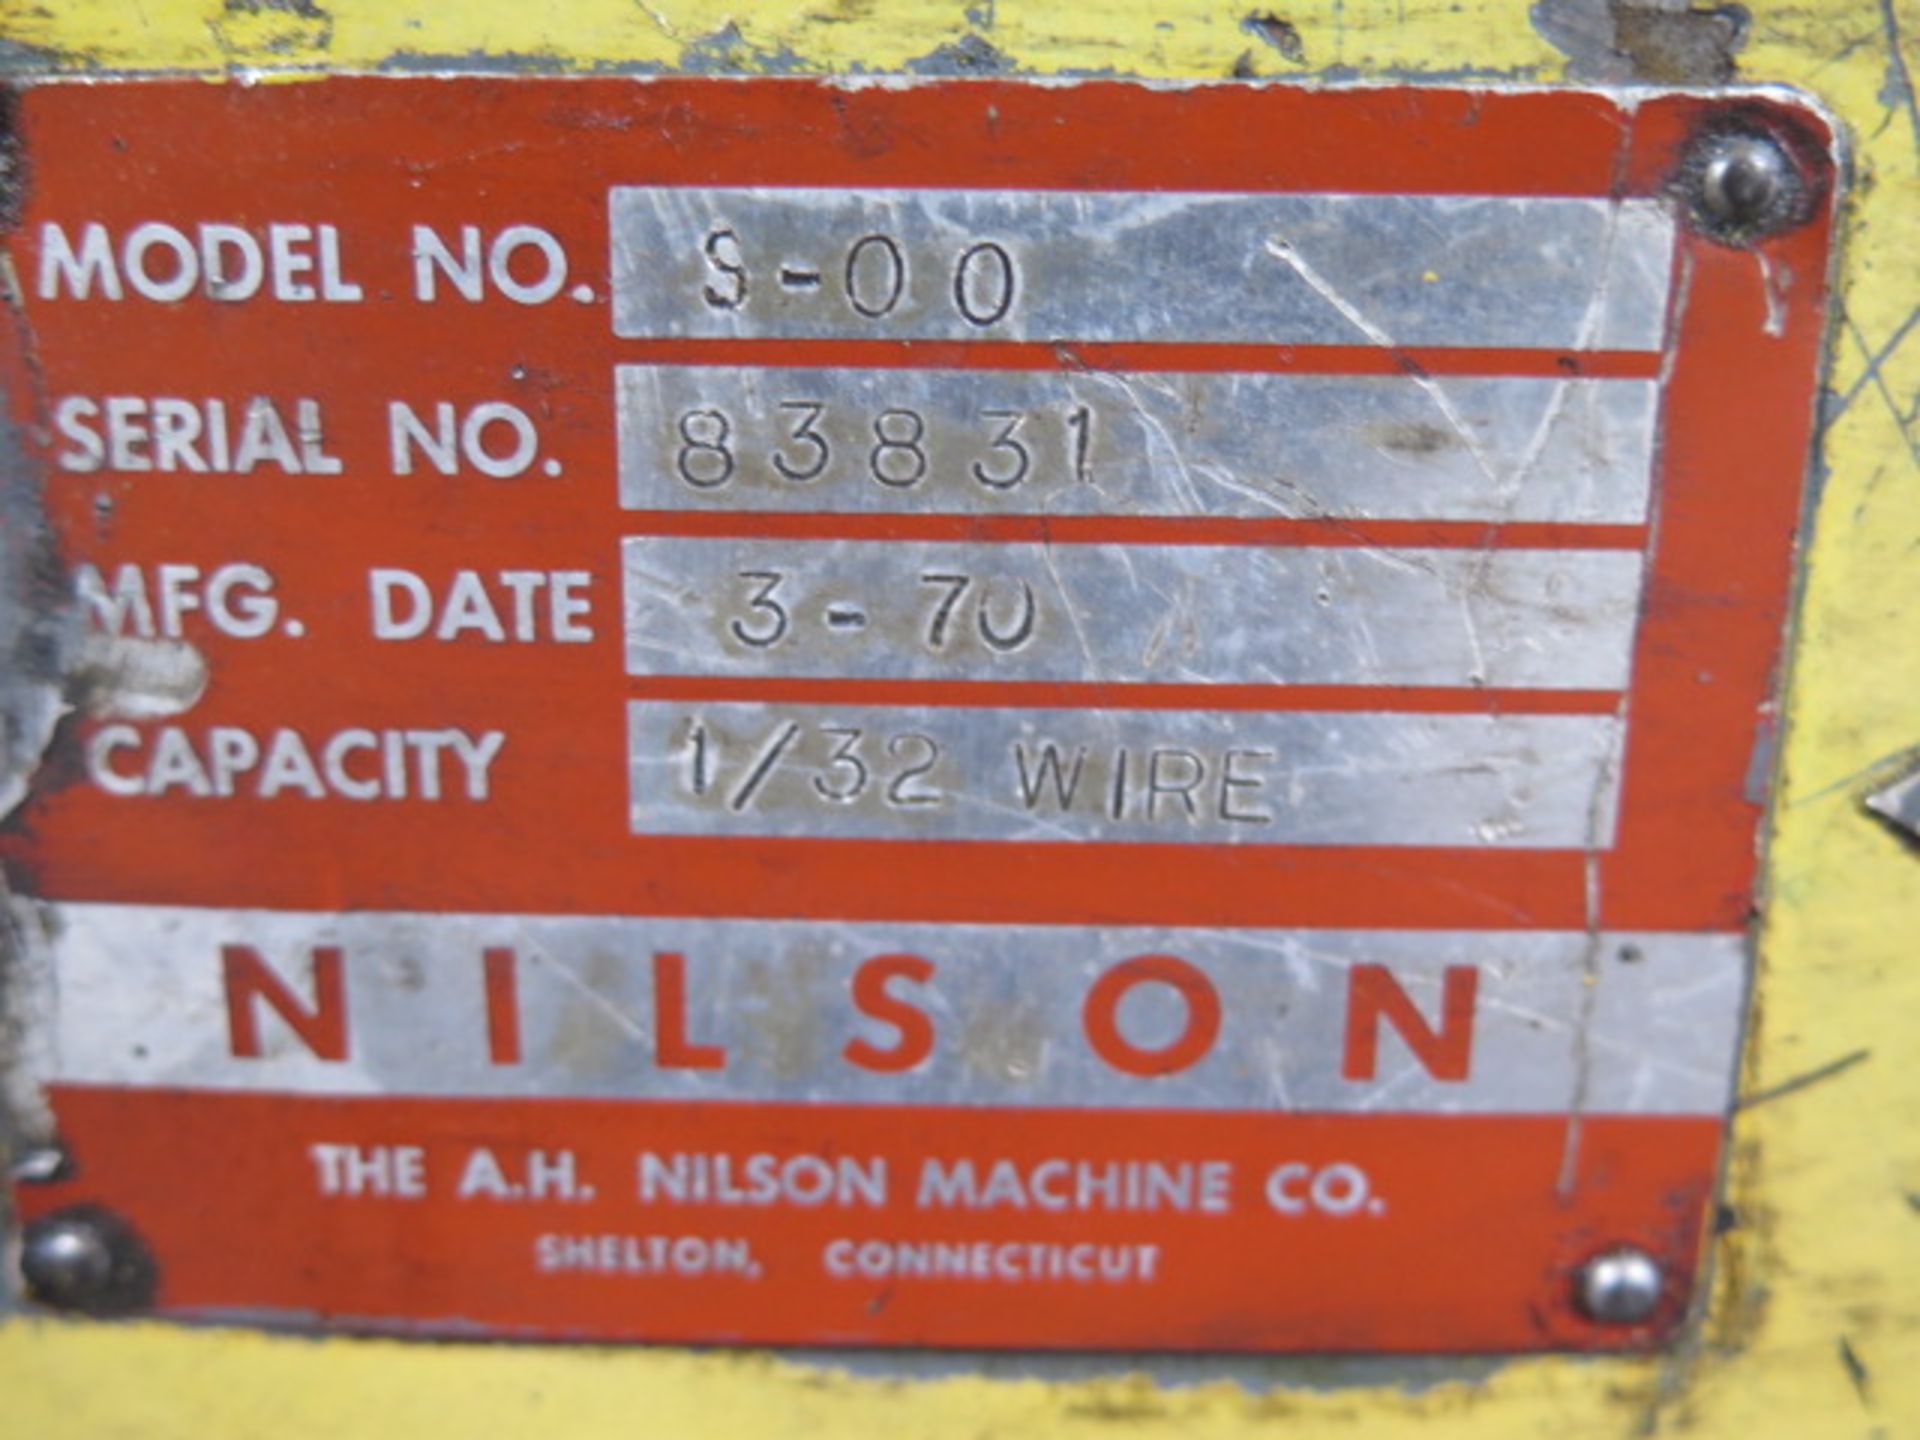 Nilson mdl. S-00 1/32” Wire Cap. Four-Slide Machine s/n 83831(AS IS - NO WARRANTY) - Image 11 of 11